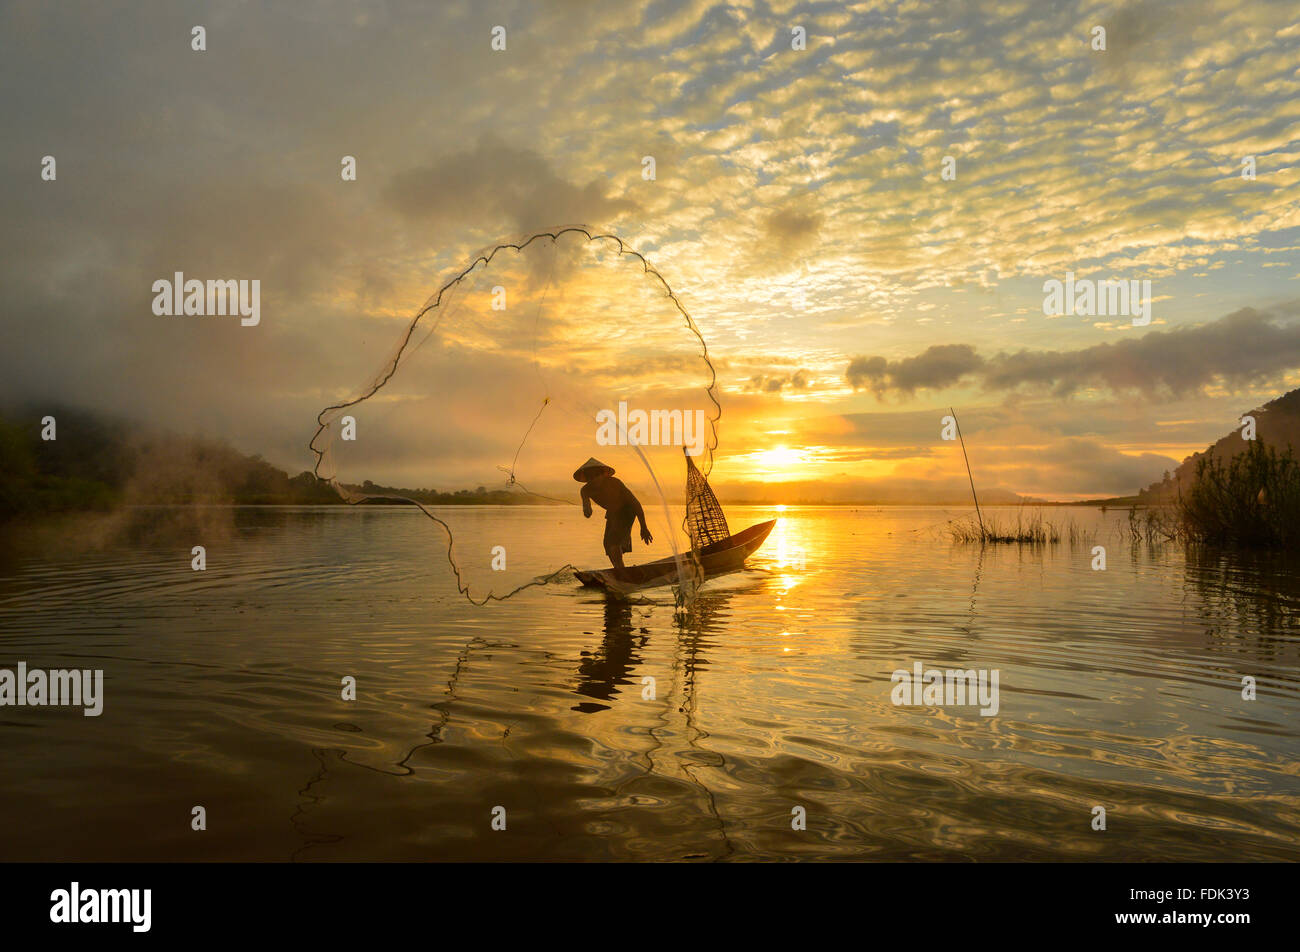 Silhouette of a man throwing fishing net, Mekong river, Sangkhom, Thailand Stock Photo